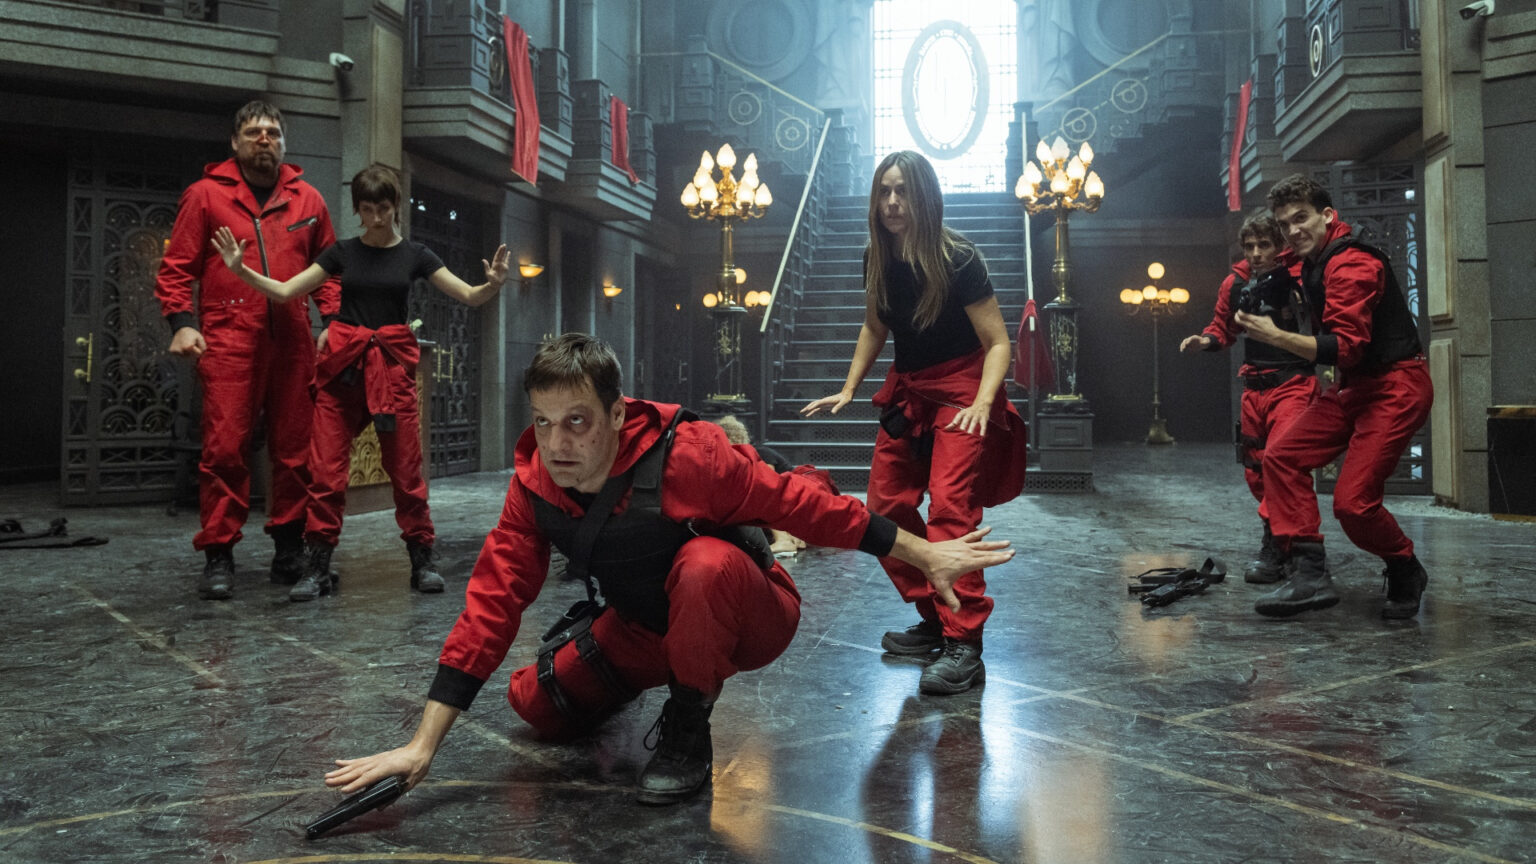 Now that 'Money Heist': Part 5 is out, the pressure is on for the show. Or, wait . . . is it Part 5: Part 1? Let’s back up a bit and explain some things.